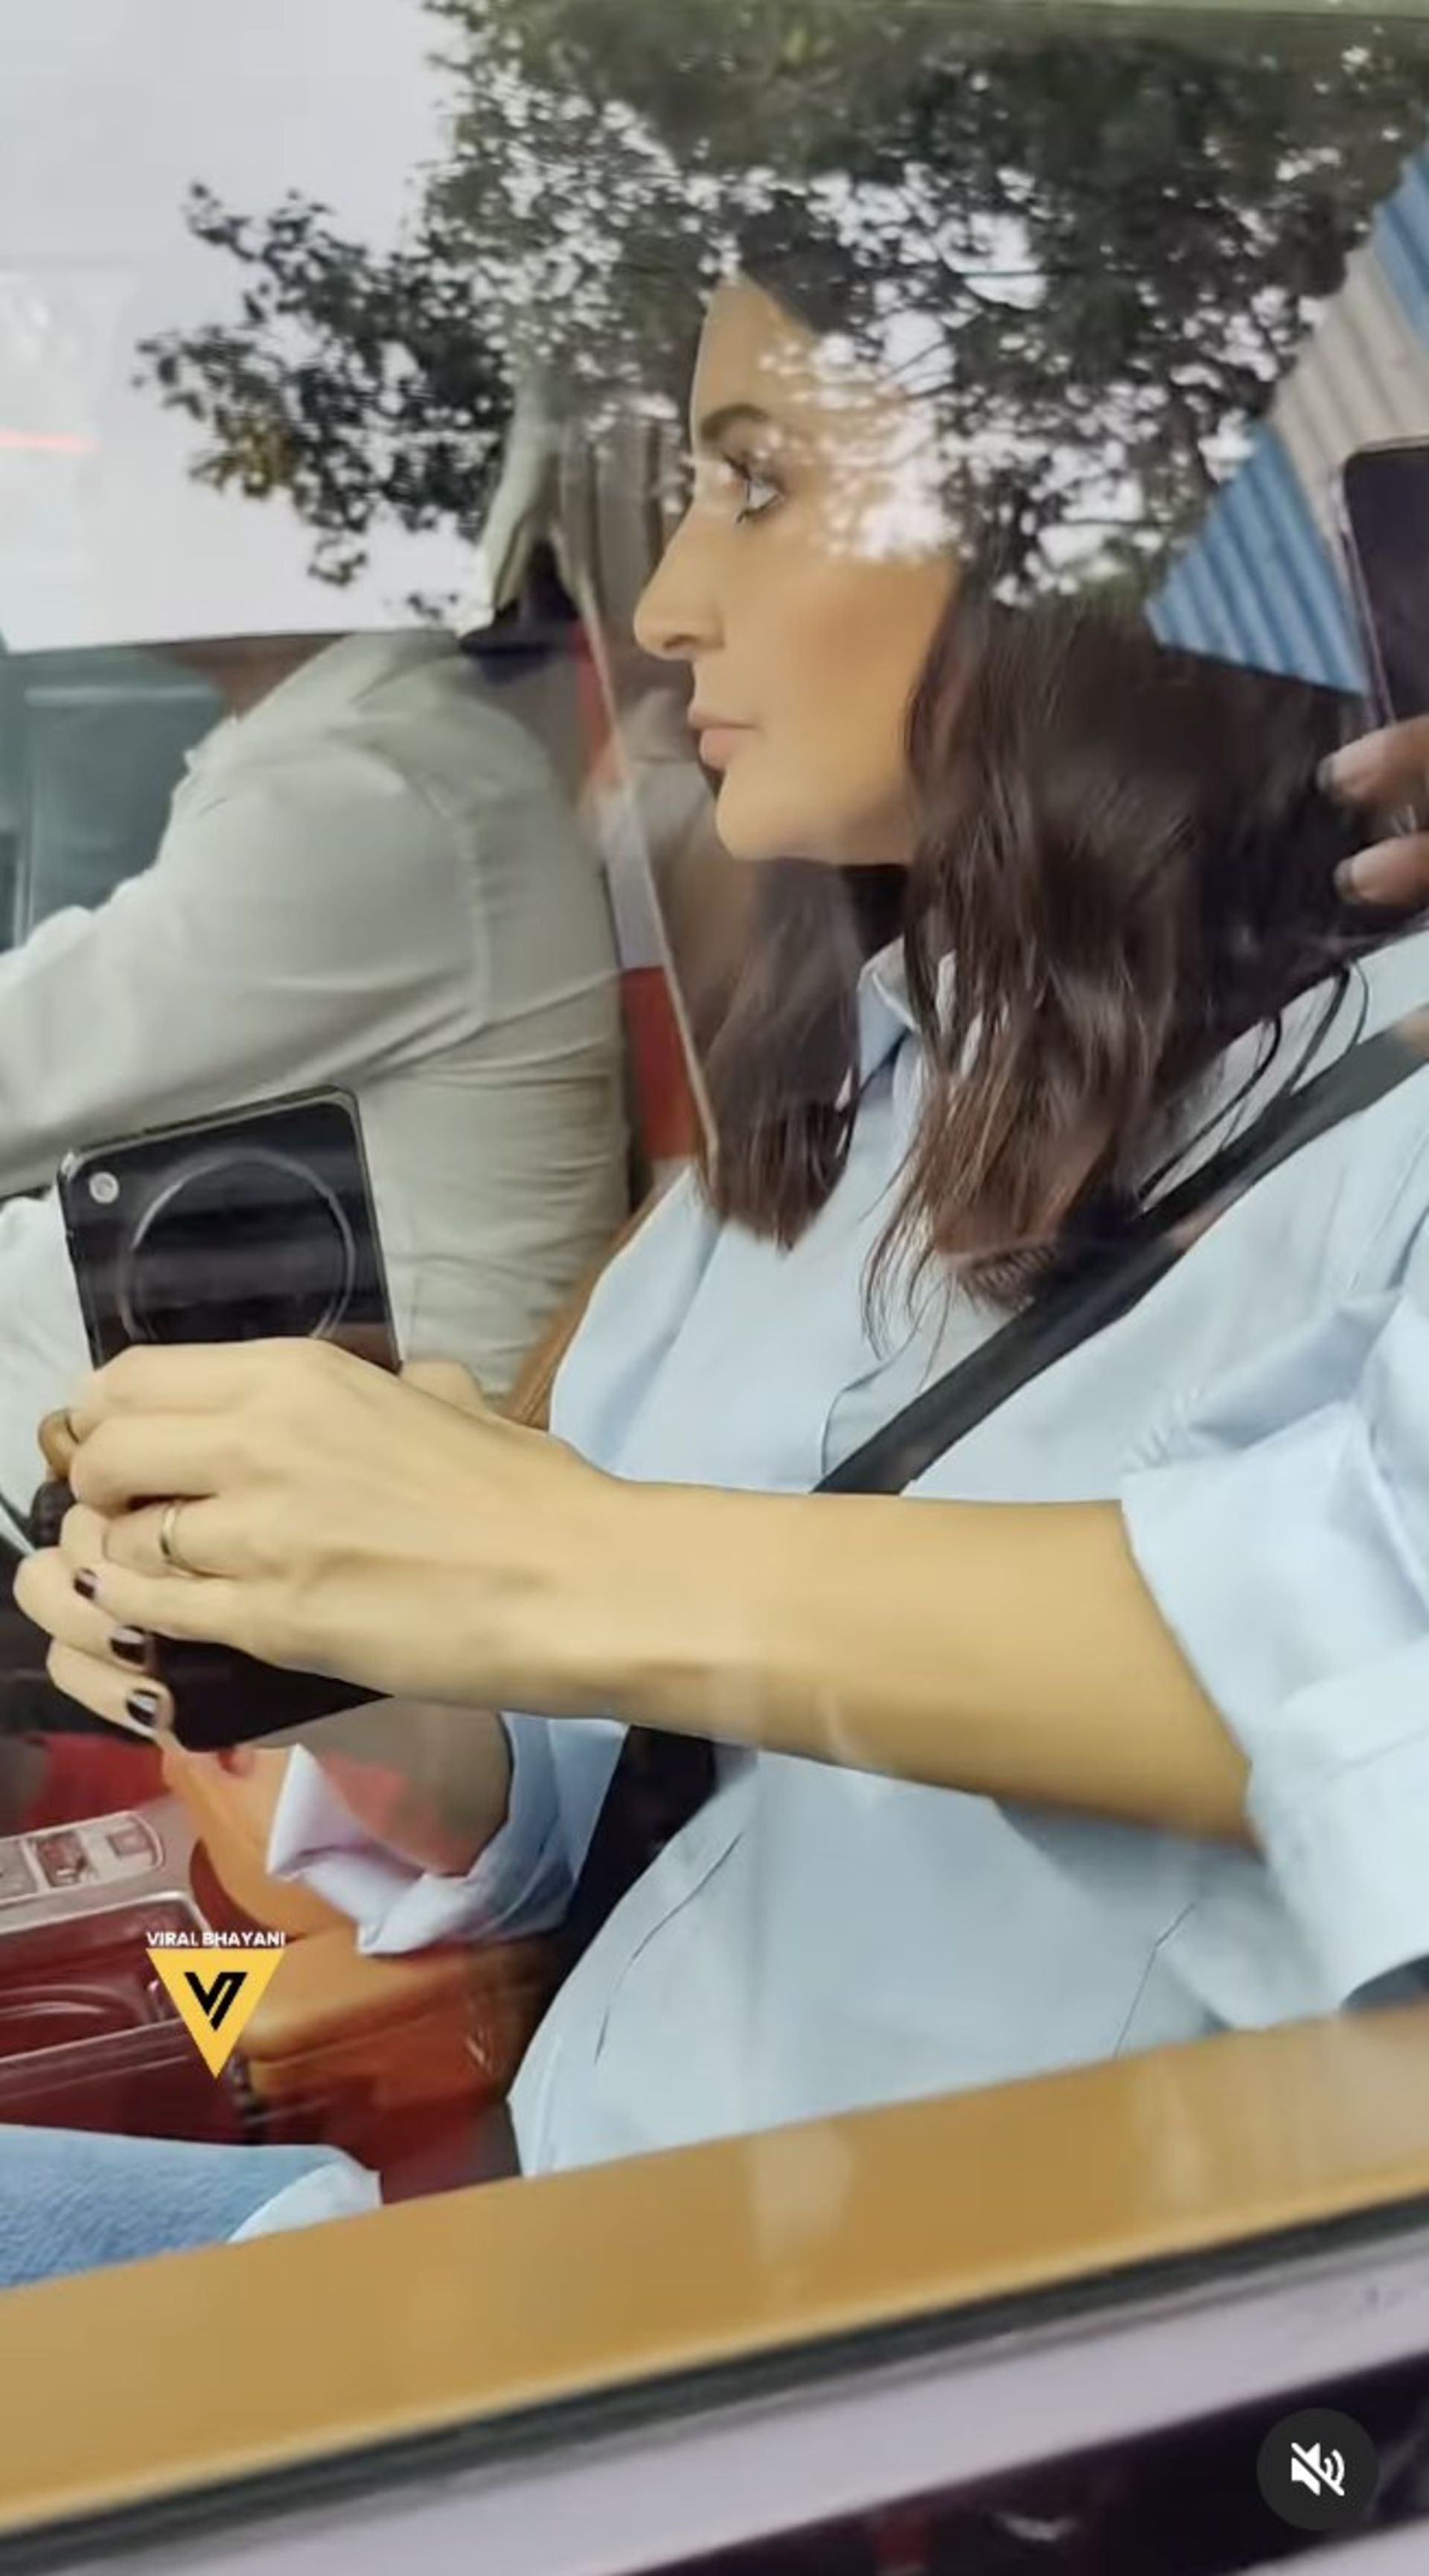 OnePlus Open being used by Indian Movie Star in a Car with Closed Windows